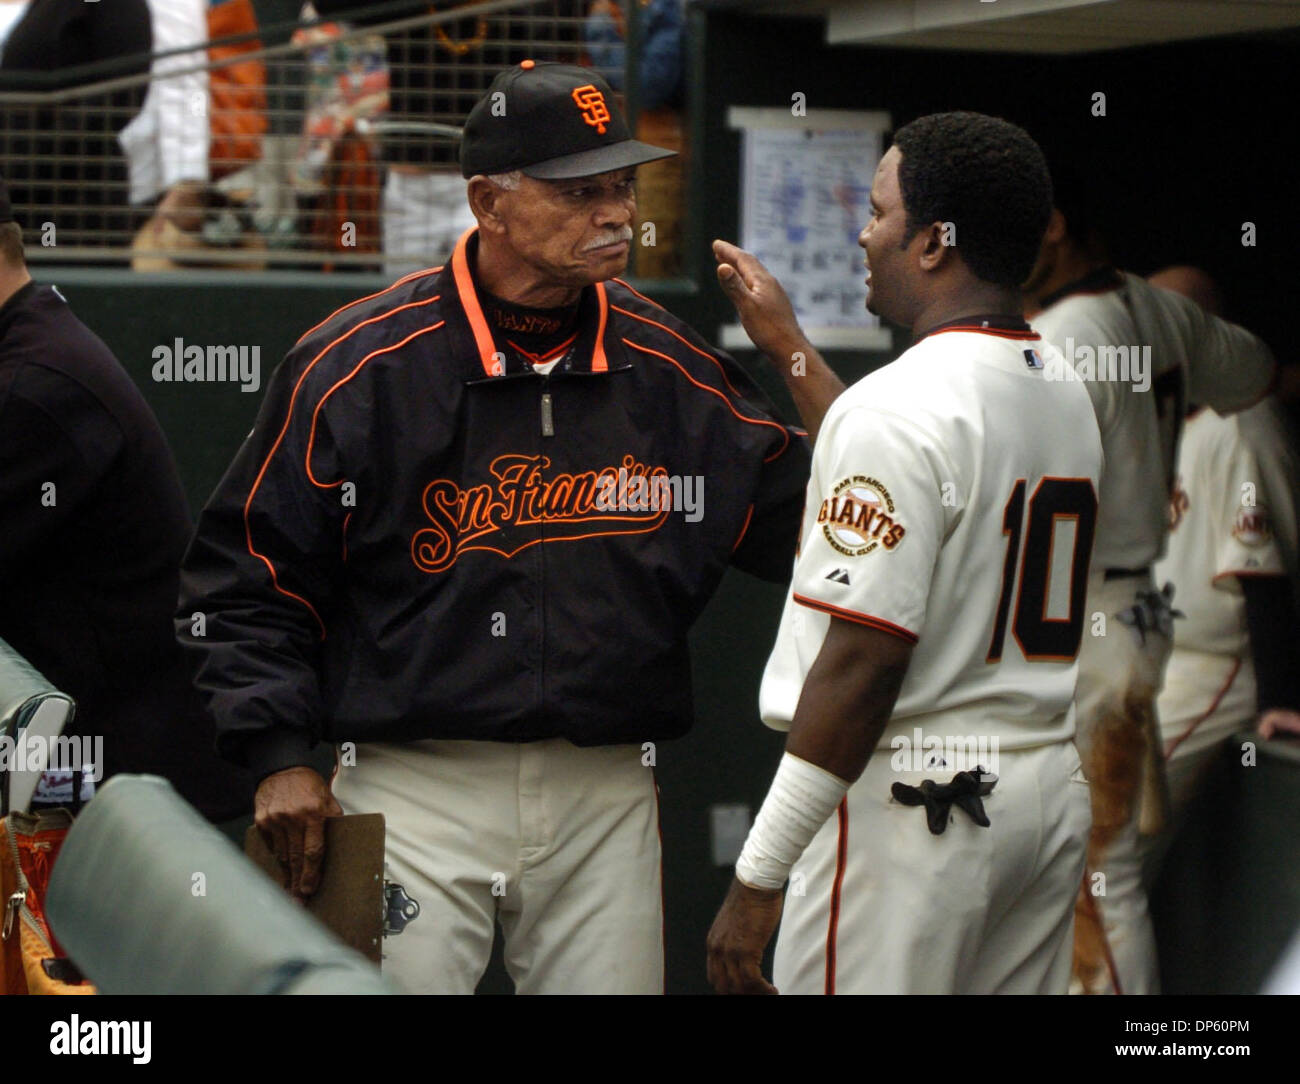 The case for Felipe Alou to be inducted as a Hall of Fame manager